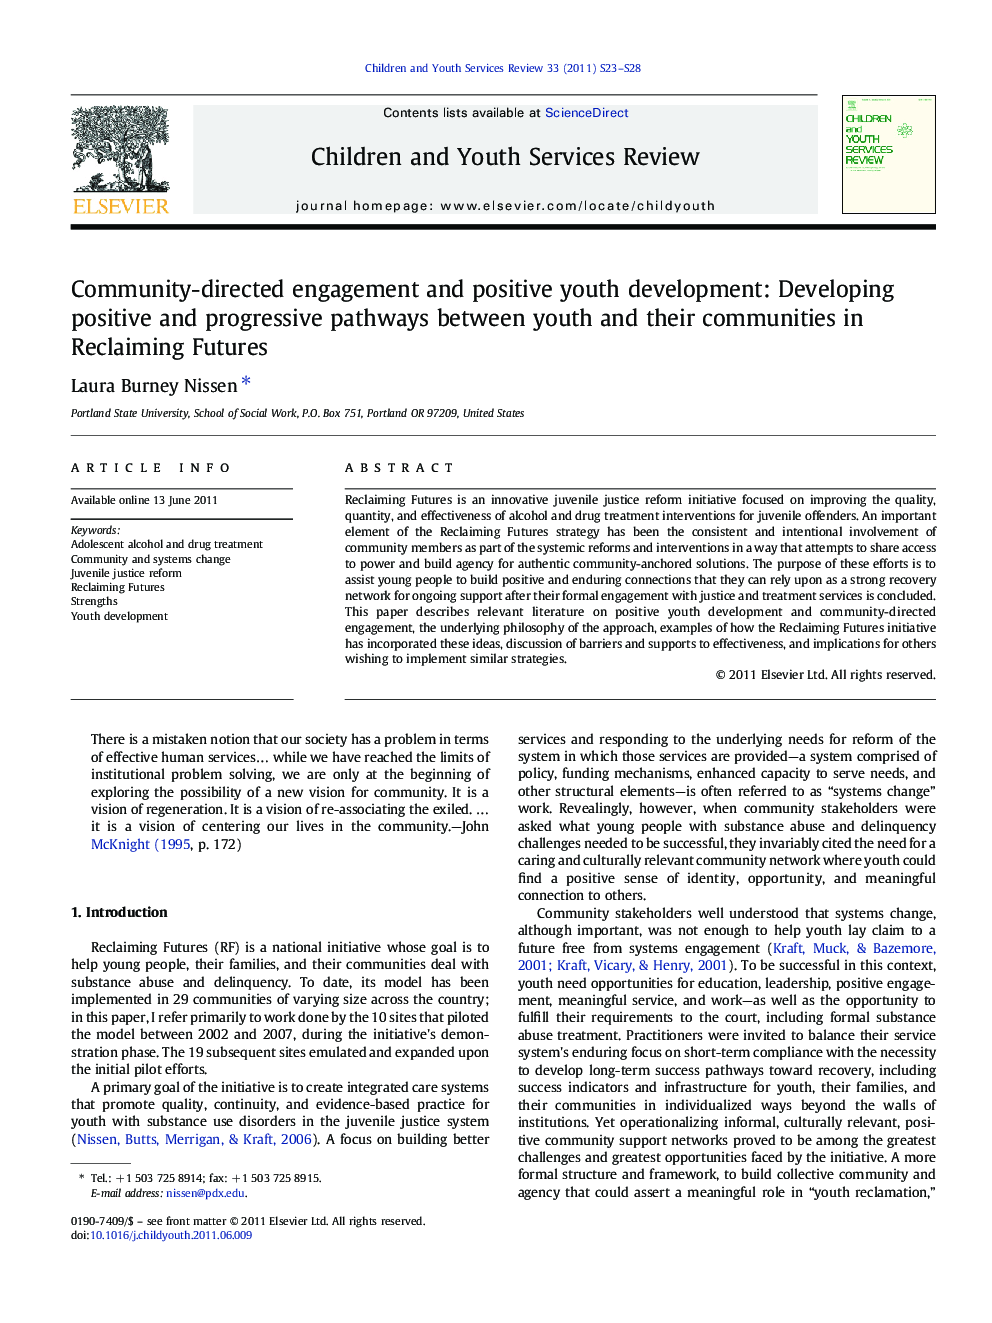 Community-directed engagement and positive youth development: Developing positive and progressive pathways between youth and their communities in Reclaiming Futures